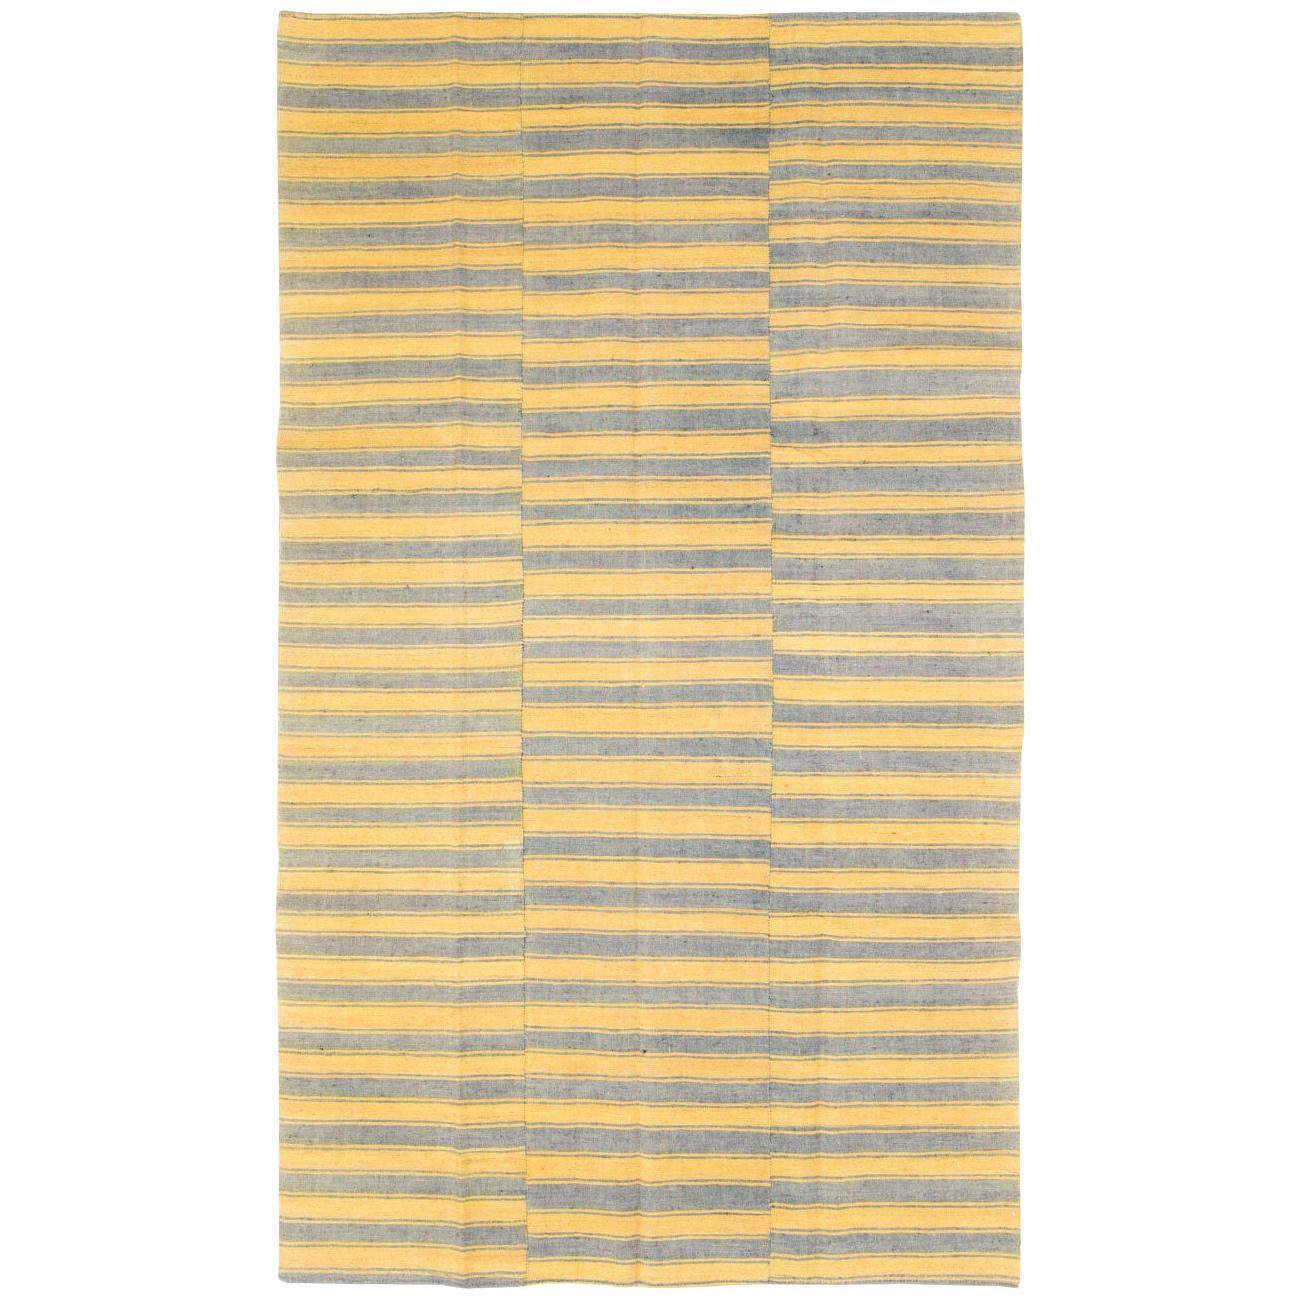 Mid-20th Century Handmade Turkish Striped Flat-Weave Kilim Accent Rug For Sale